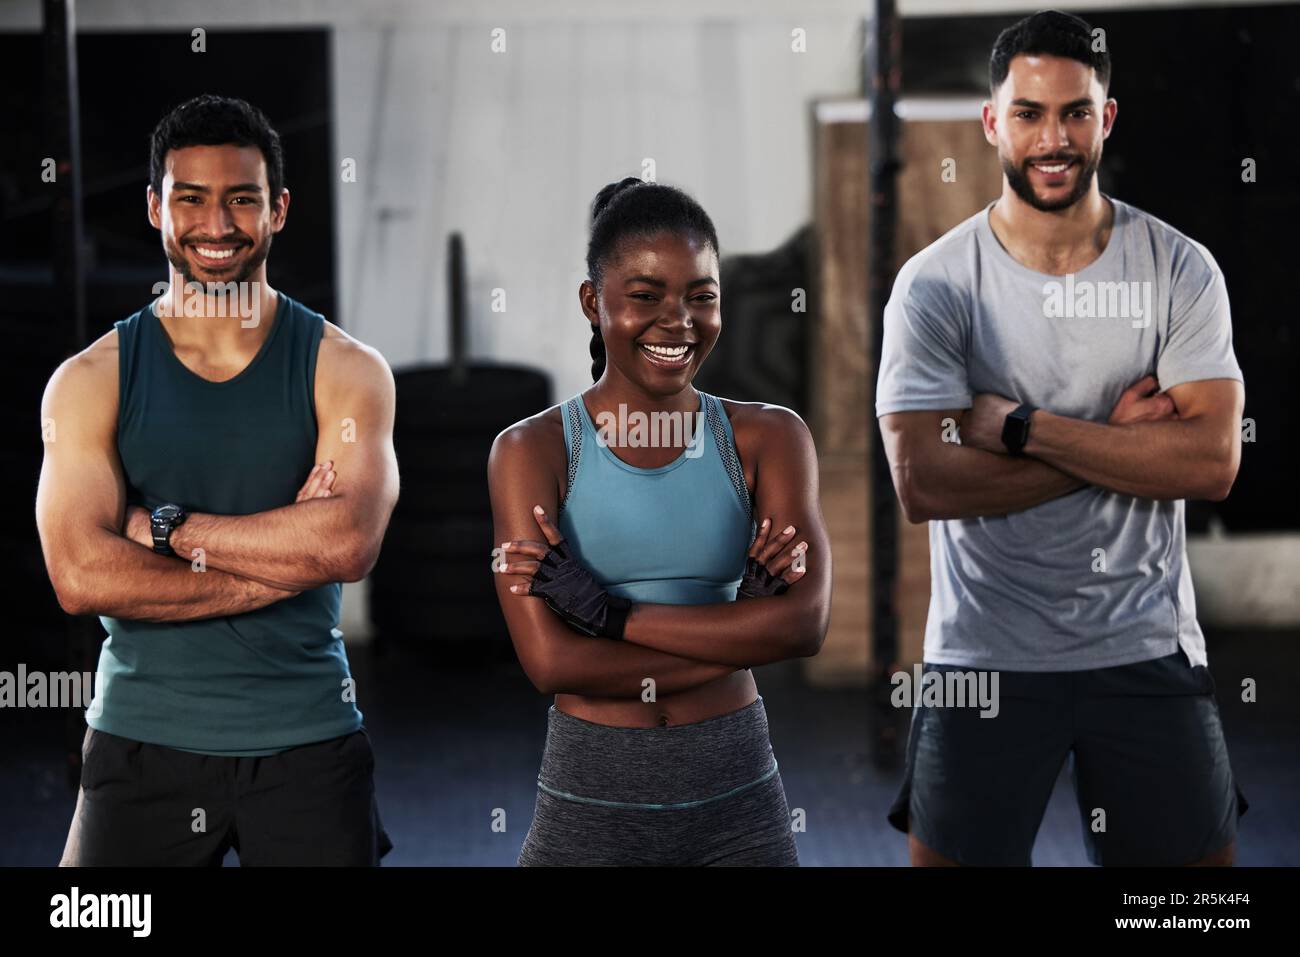 https://c8.alamy.com/comp/2R5K4F4/personal-trainer-team-portrait-or-happy-people-at-gym-for-a-workout-exercise-or-training-for-healthy-fitness-sports-coaches-black-woman-or-2R5K4F4.jpg